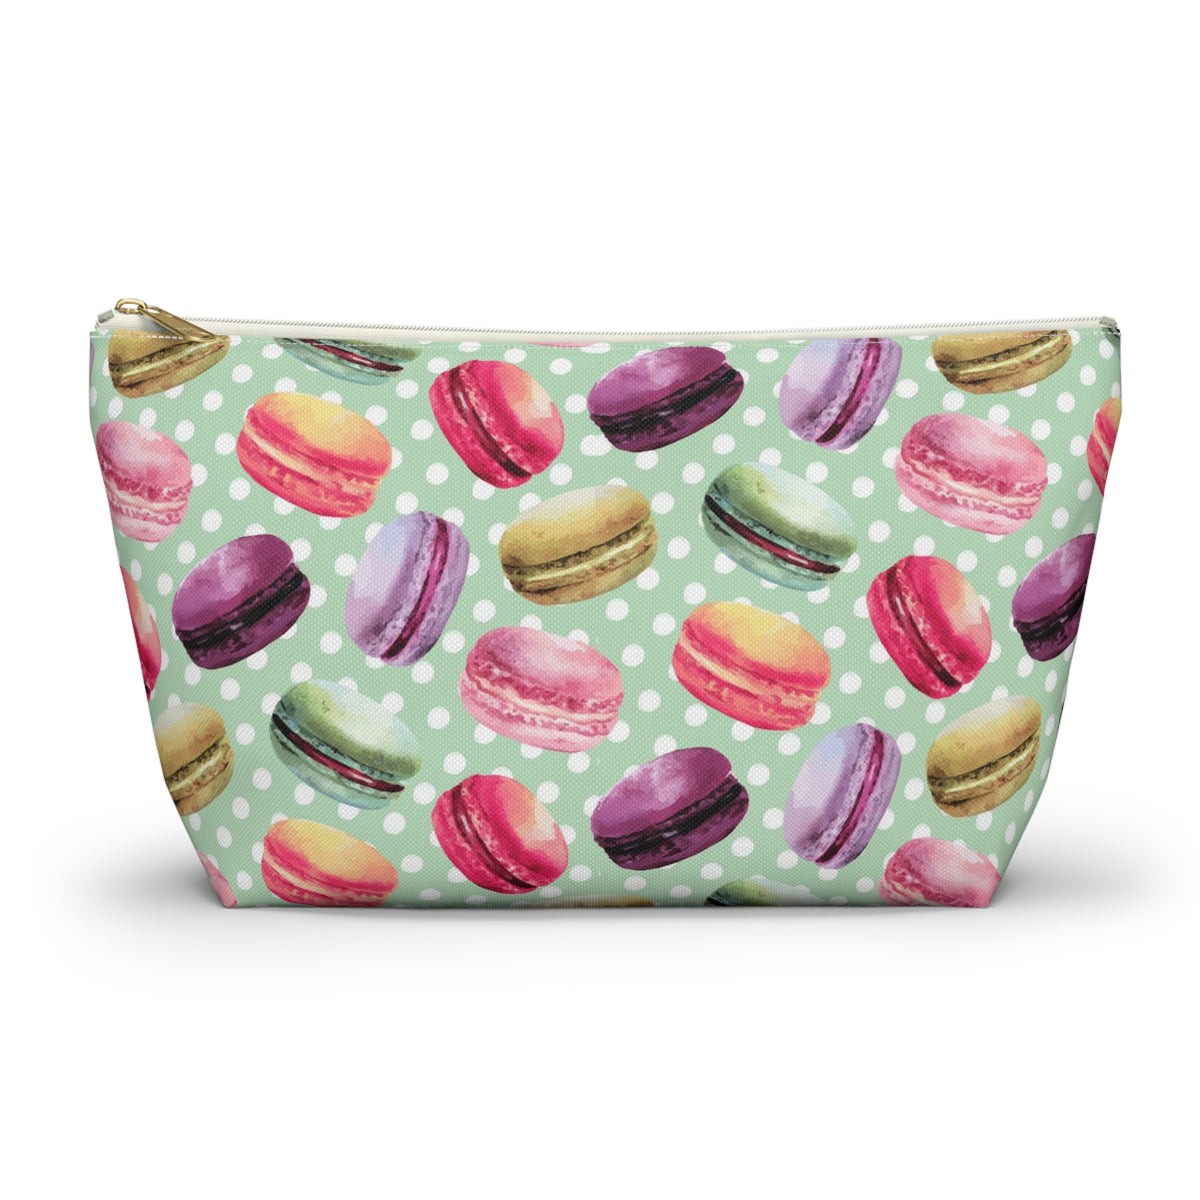 French Macaron Print Makeup Cosmetic Bag | Macaron Baking Gifts | Accessory Pouch with T-Bottom